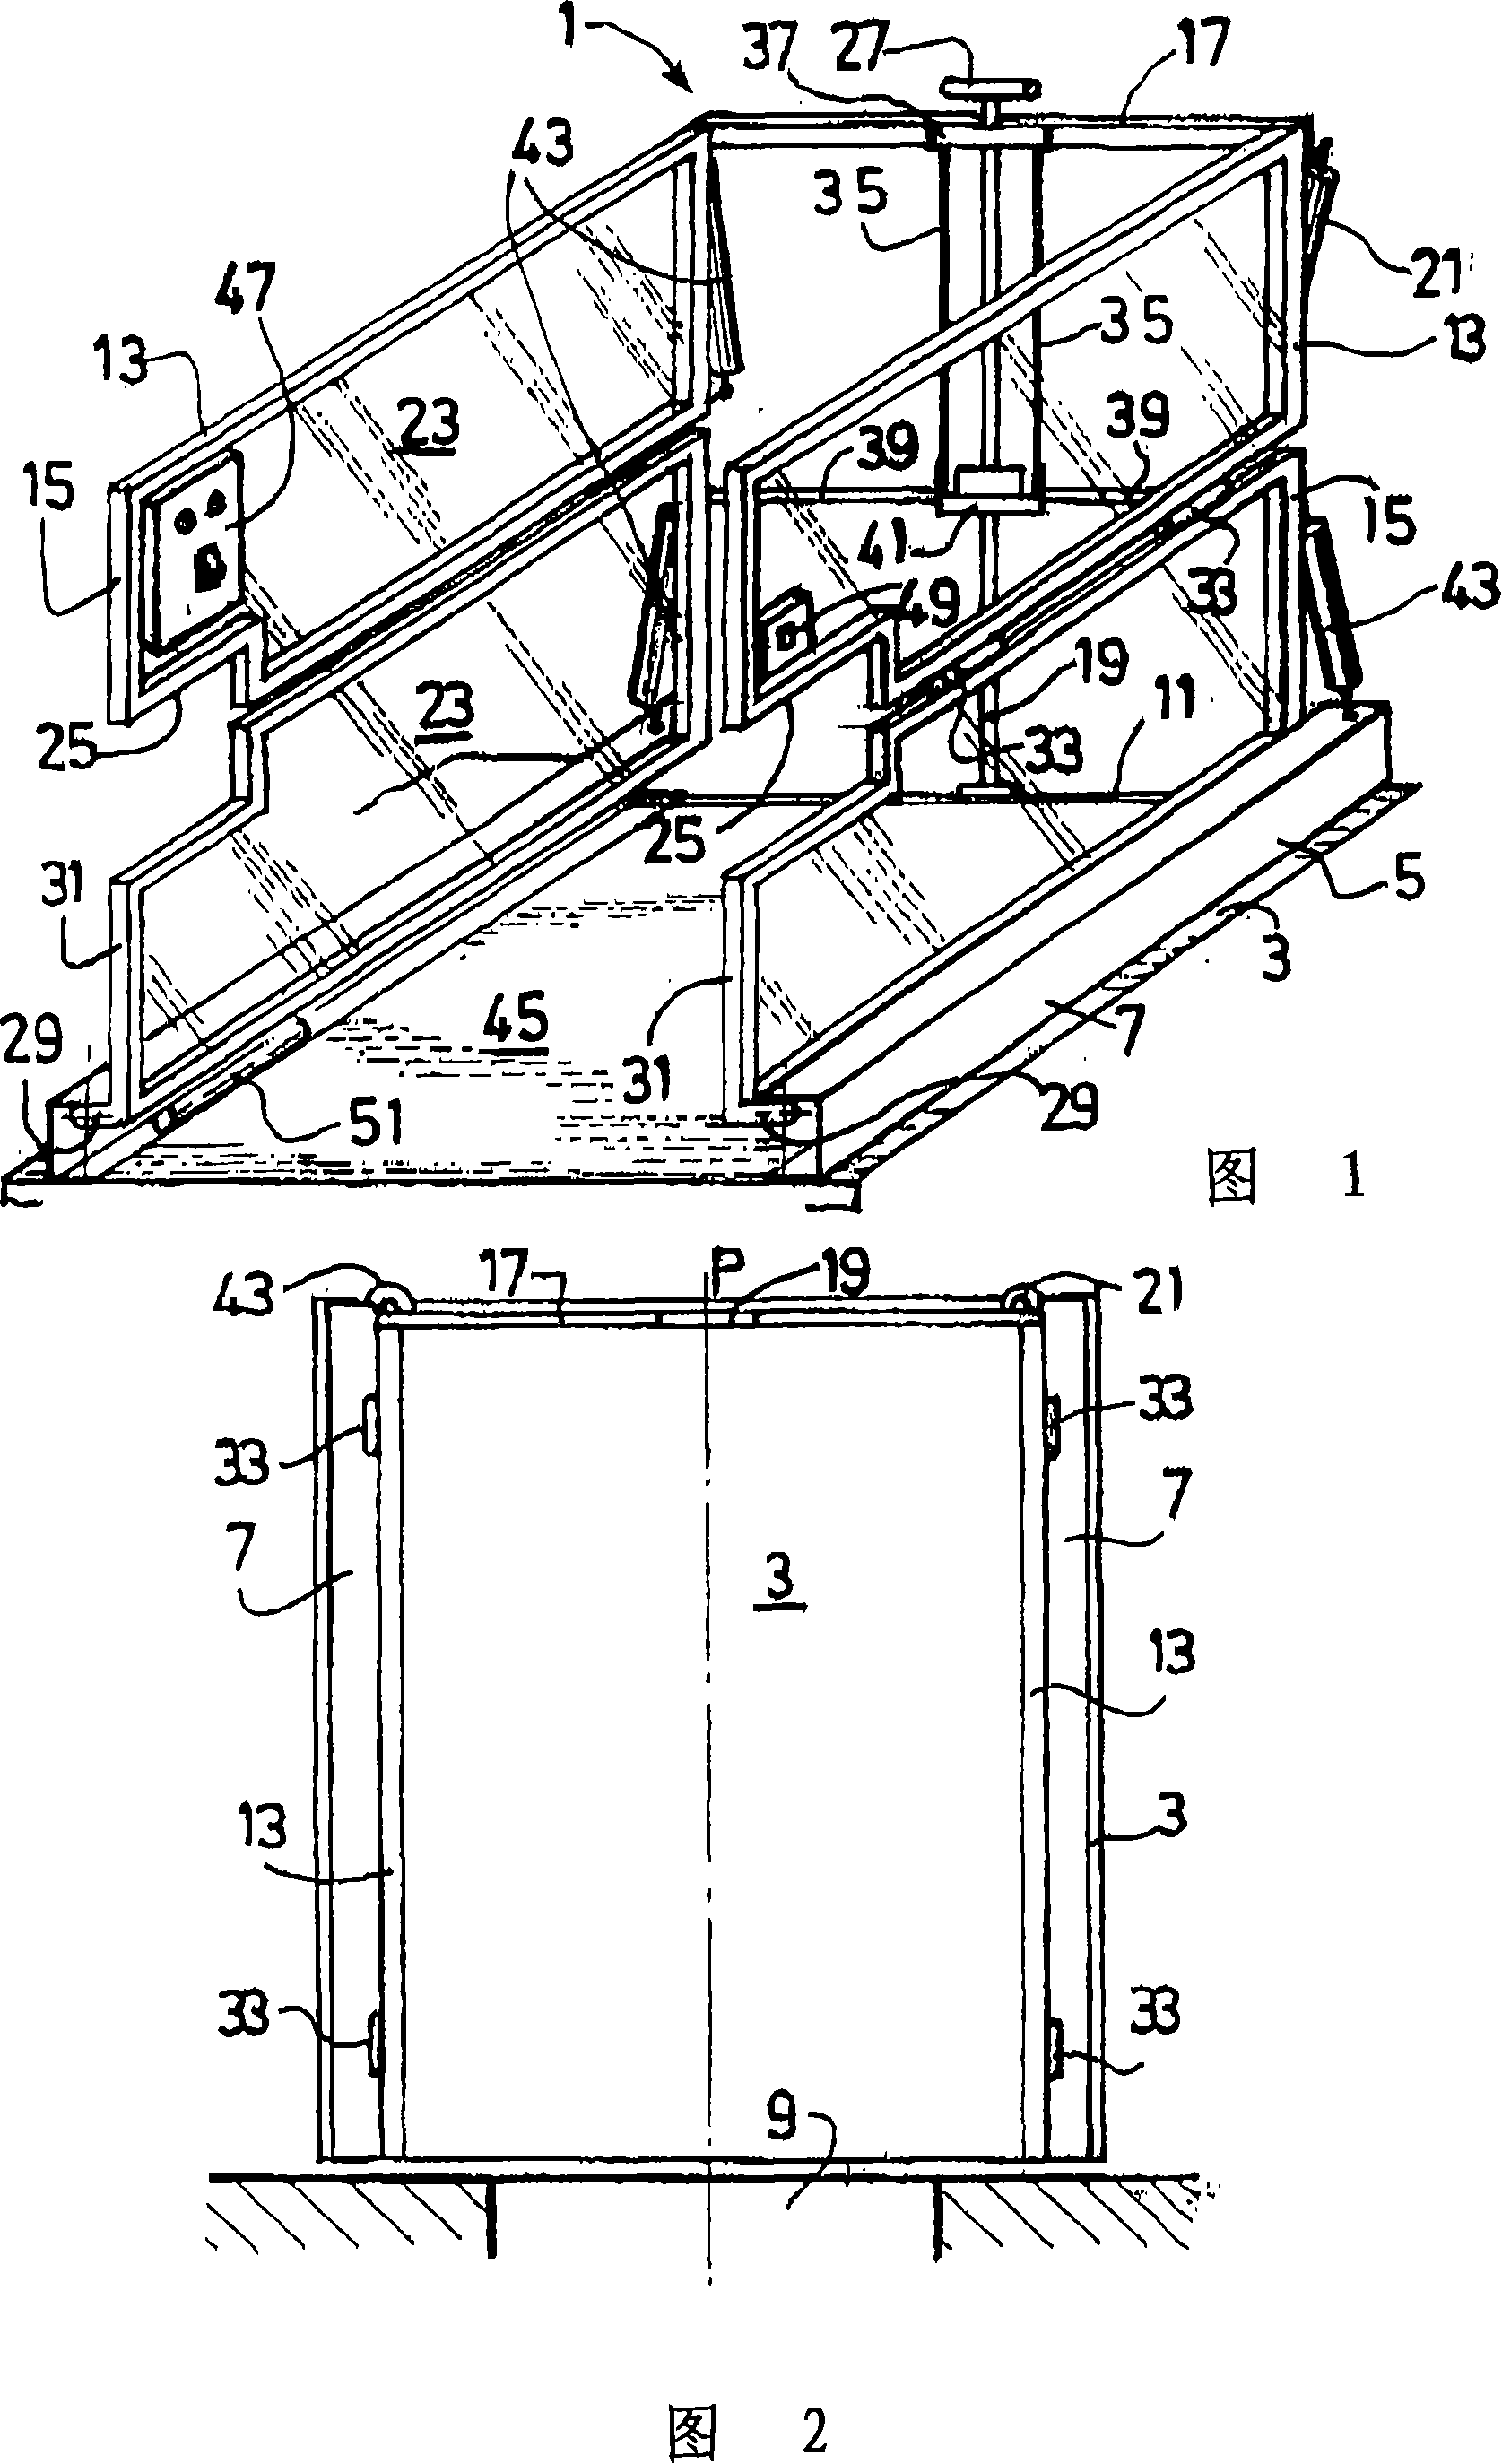 Roof railing for an elevator car adapted to be collapsed with a handle actuating all sides at the same time